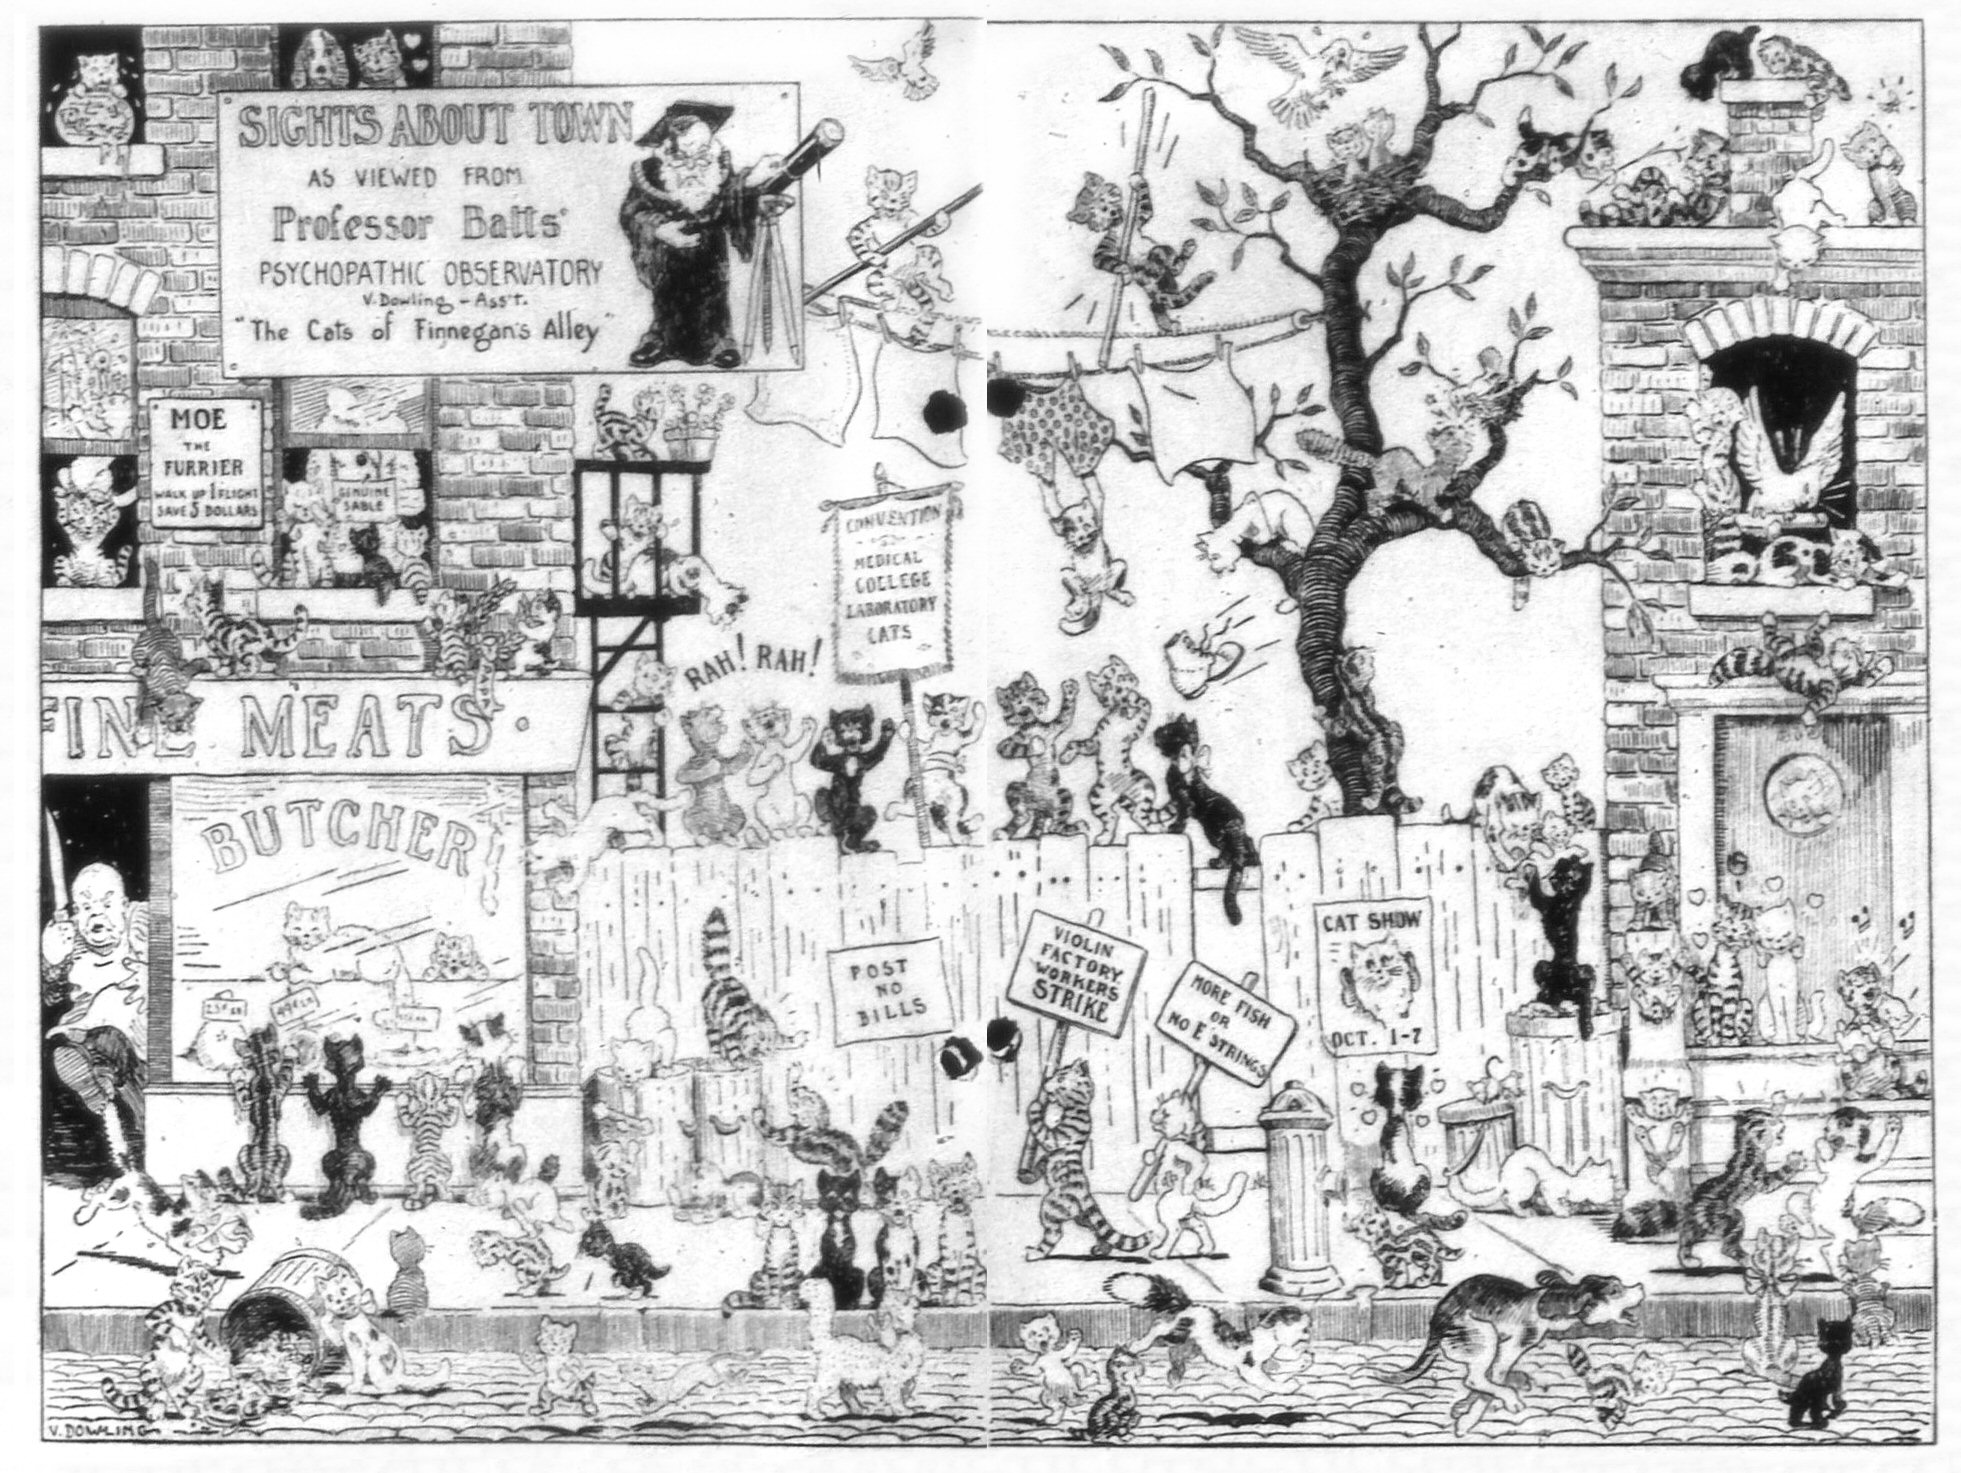 Sights About Town
As Viewed From
Professor Batts'
Psychopathic Observatory
V. Dowling - Ass't.
'The Cats of Finnegan's Alley'
From Funny Pages Comics, 1934